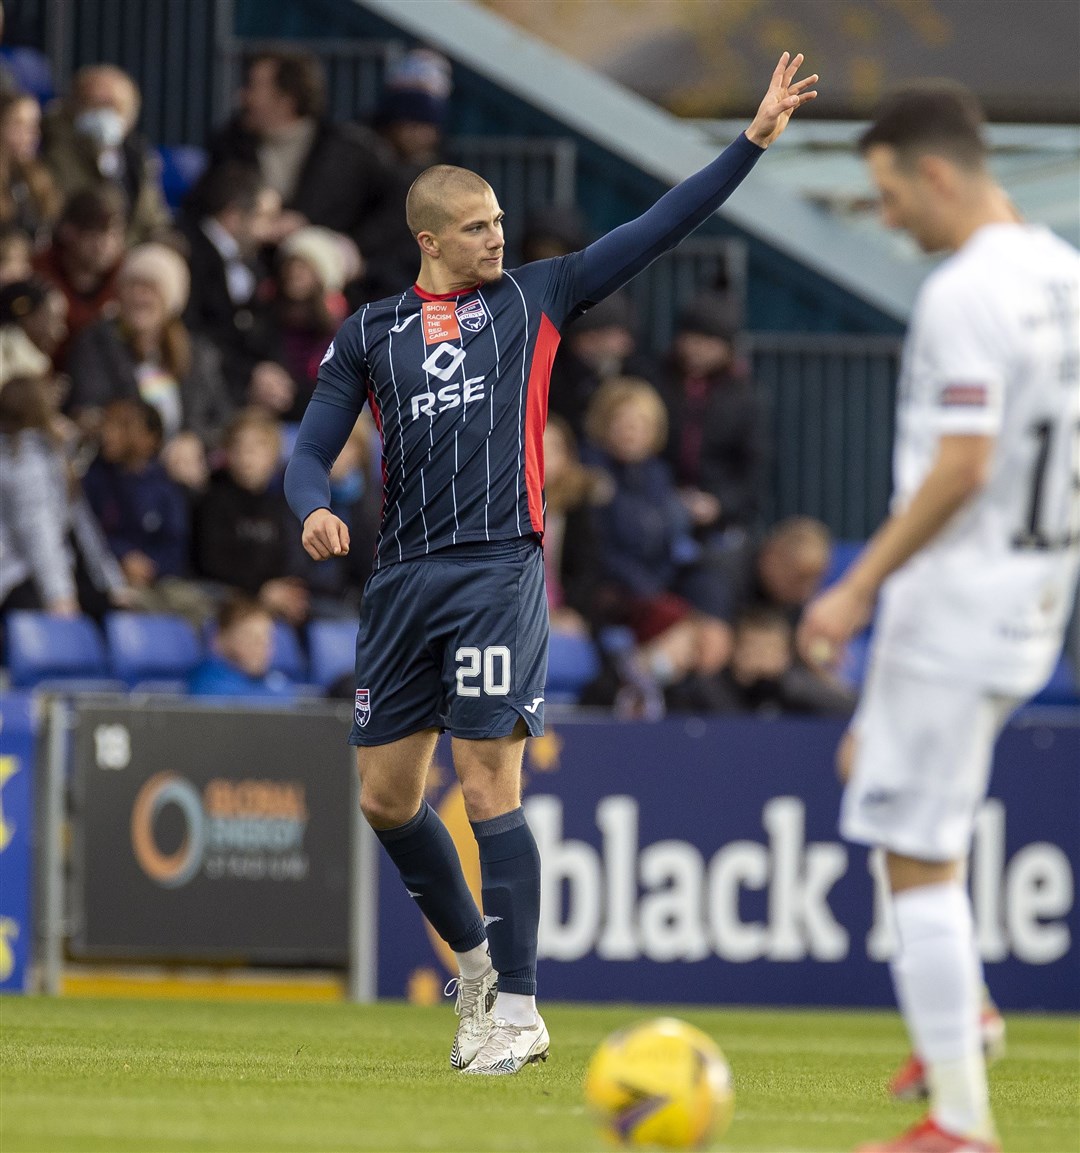 Picture - Ken Macpherson, Inverness. Ross County(2) v Livingston(3). 23.10.21. Ross County's Harry Clarke celebrates his goal.